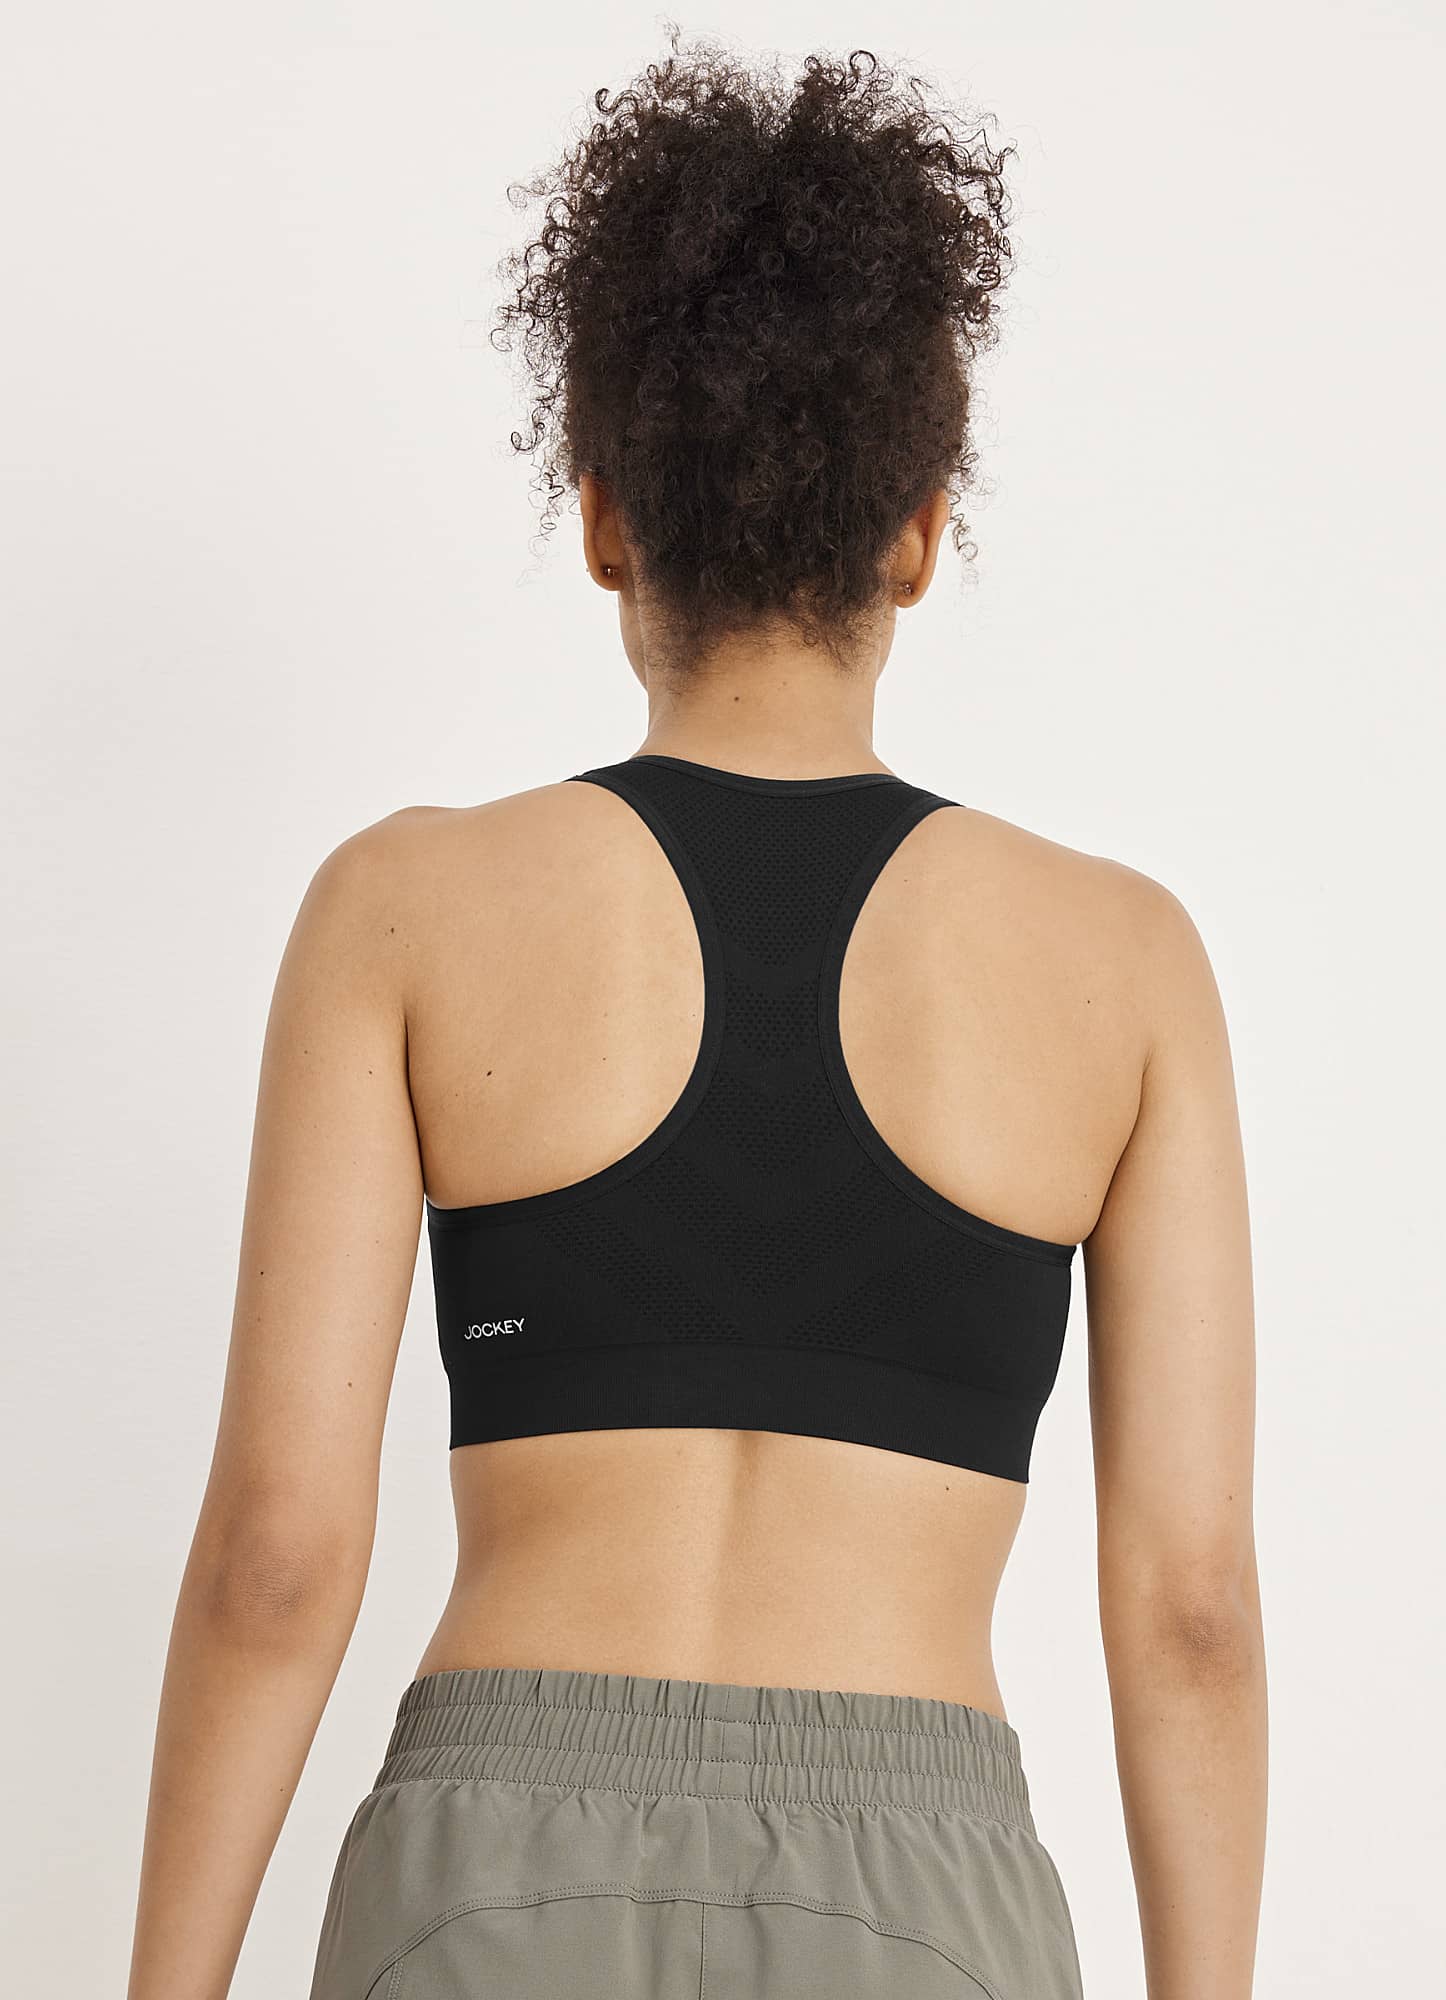 Find more Lululemon Lift & Separate Run Bra for sale at up to 90% off